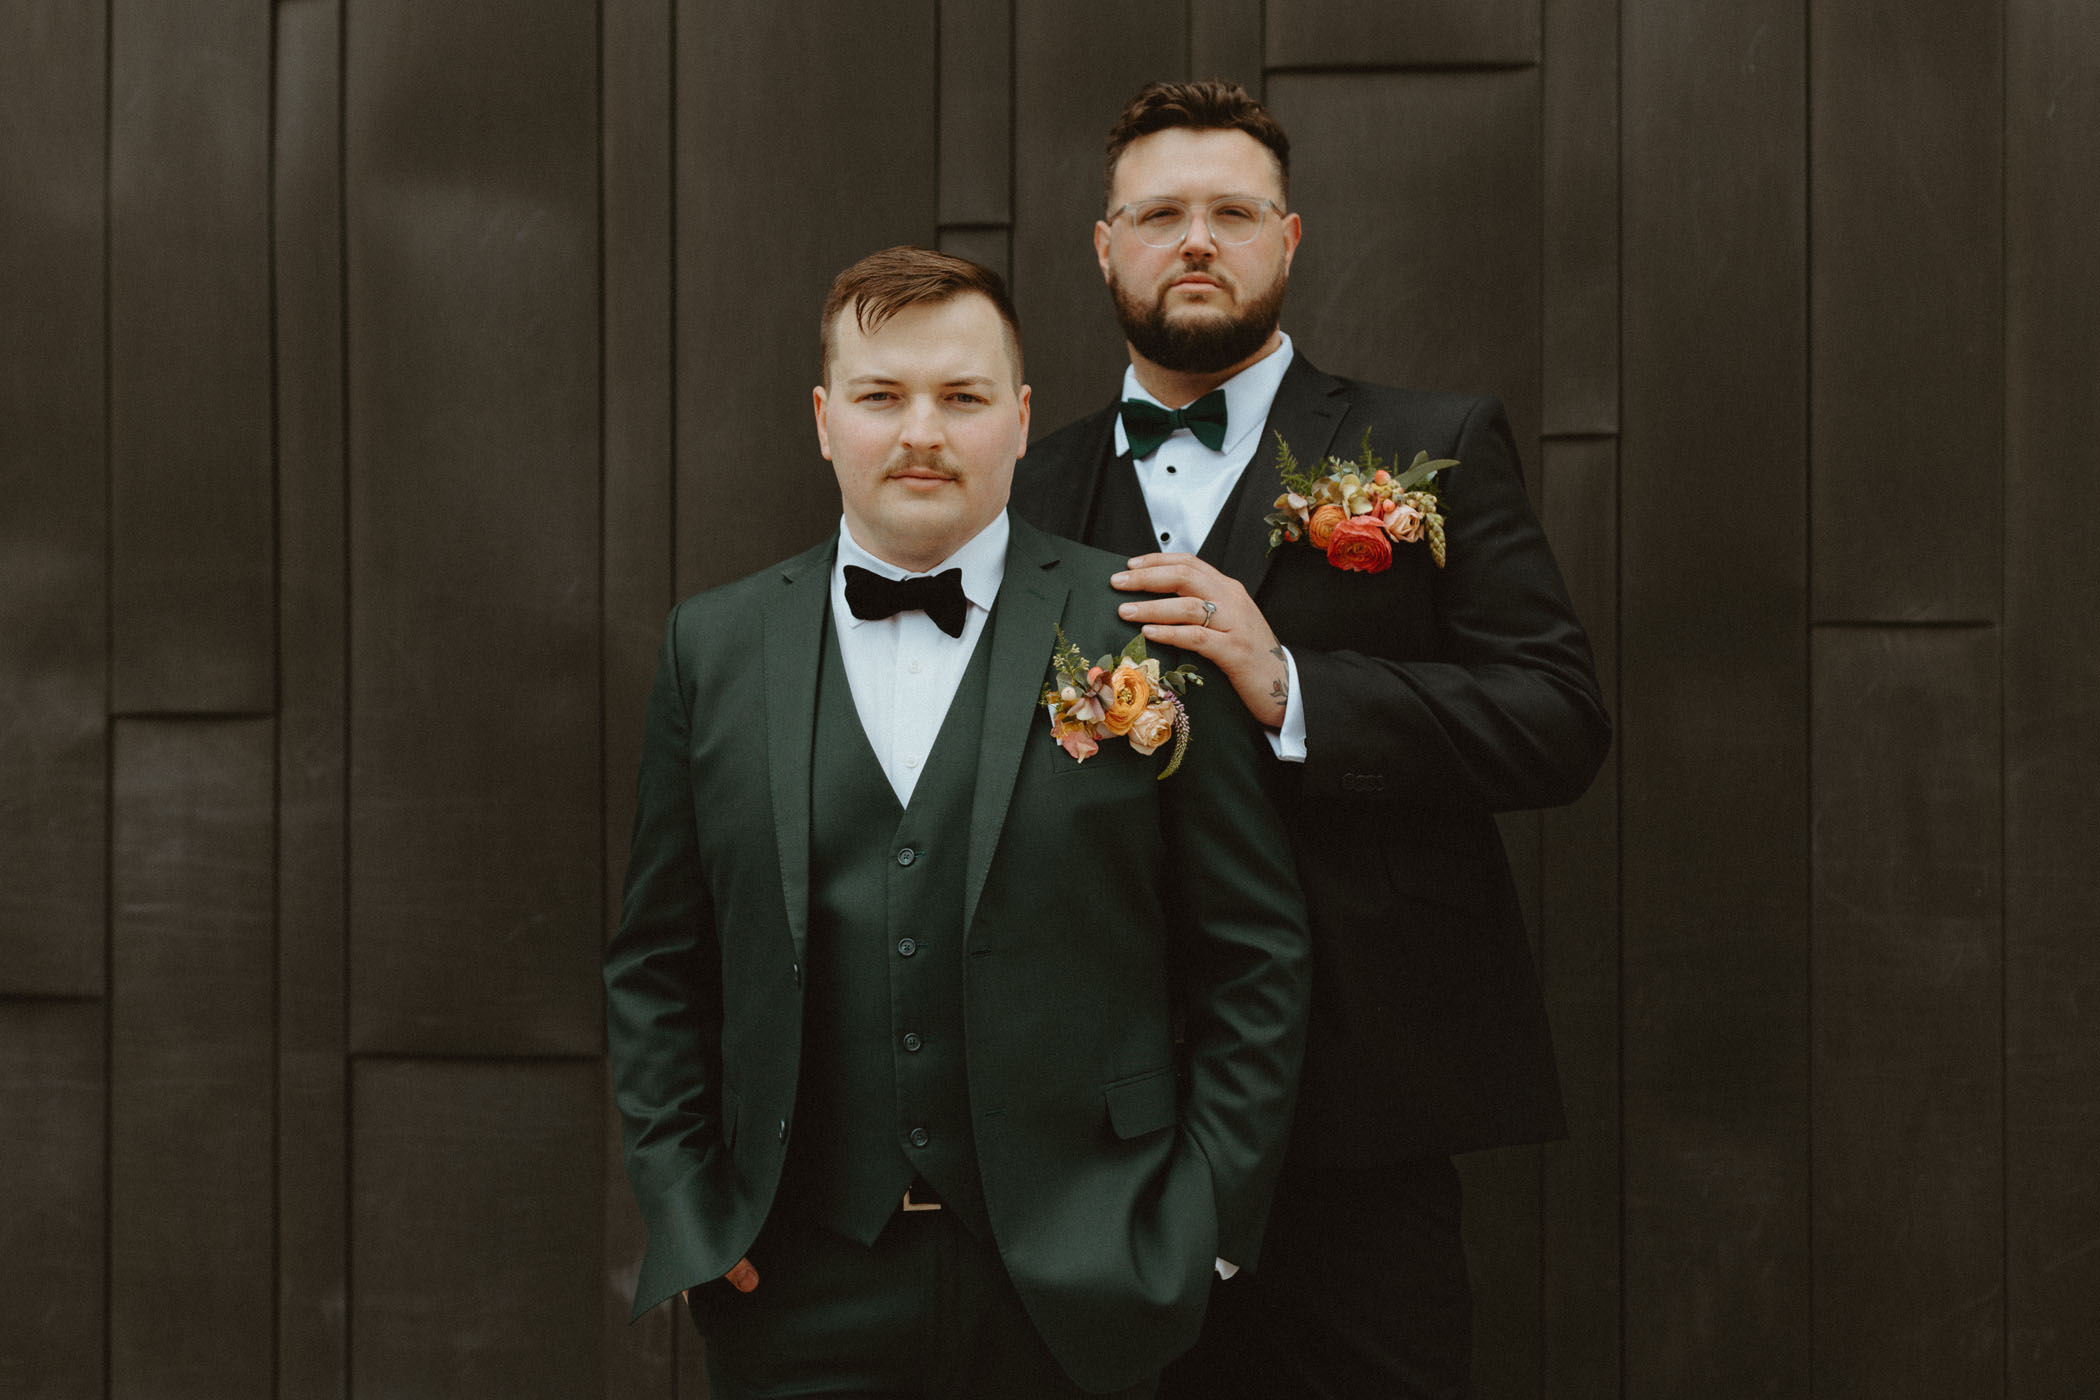 Grooms recreate first date for wedding